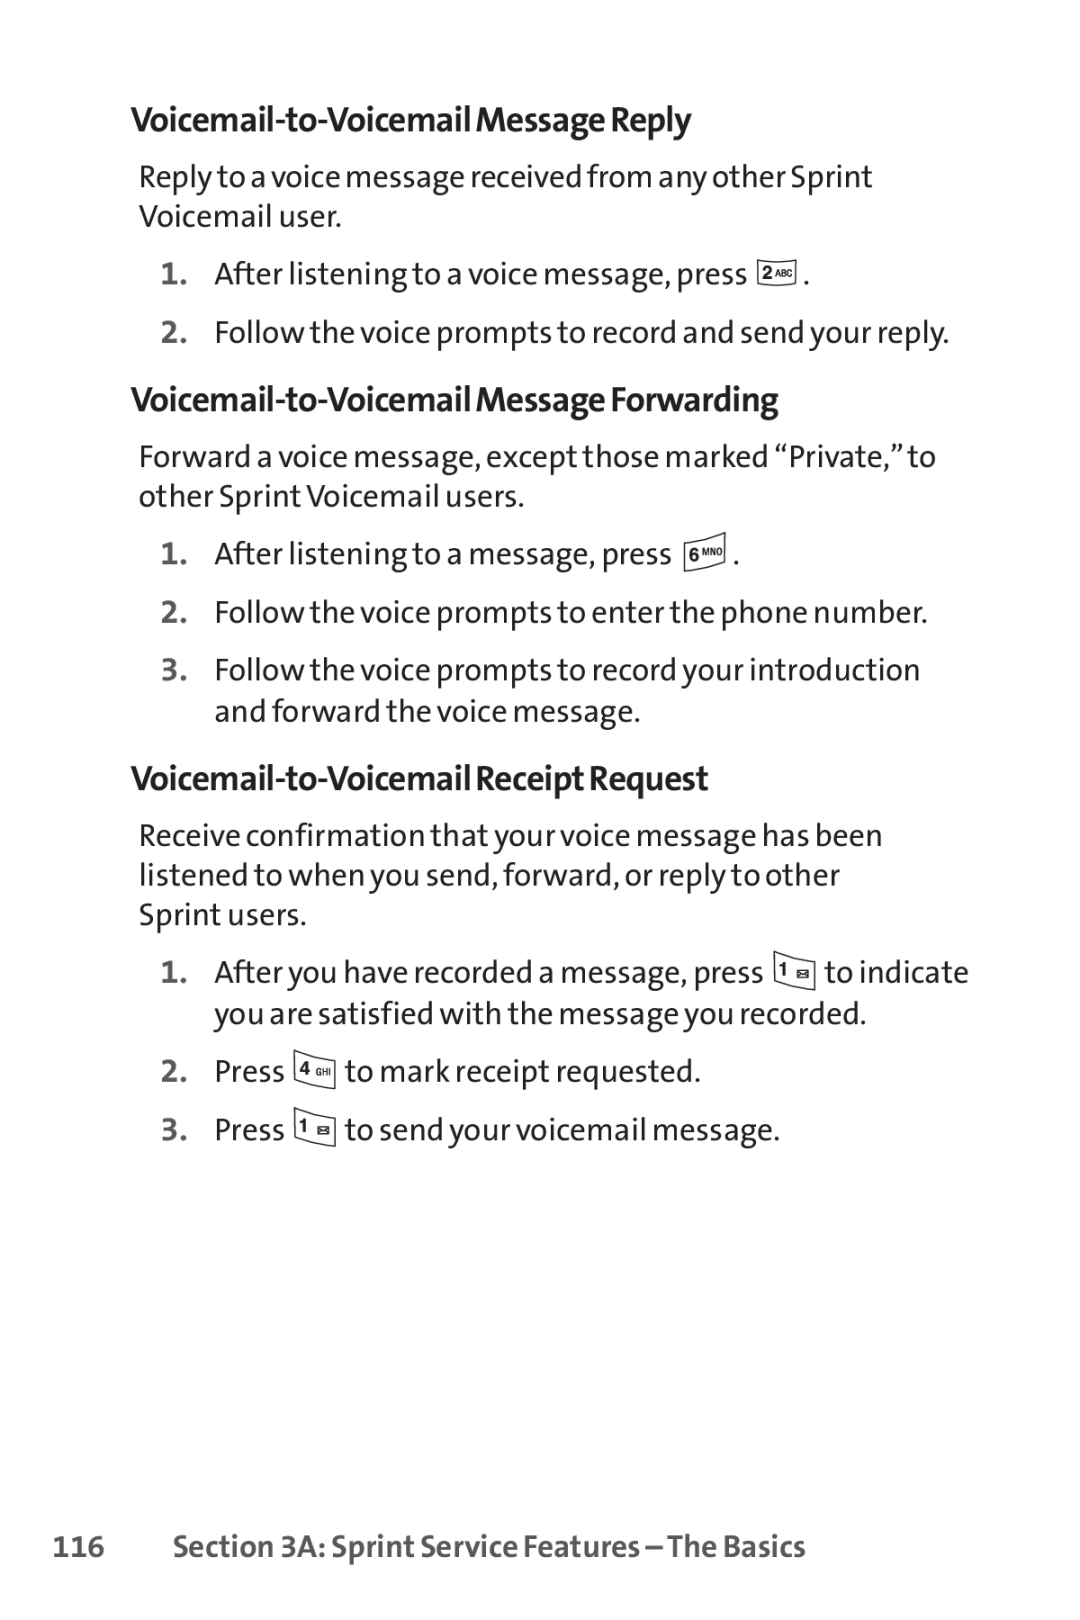 Sprint Nextel LX160 manual Voicemail-to-VoicemailMessageReply, Voicemail-to-VoicemailMessageForwarding 